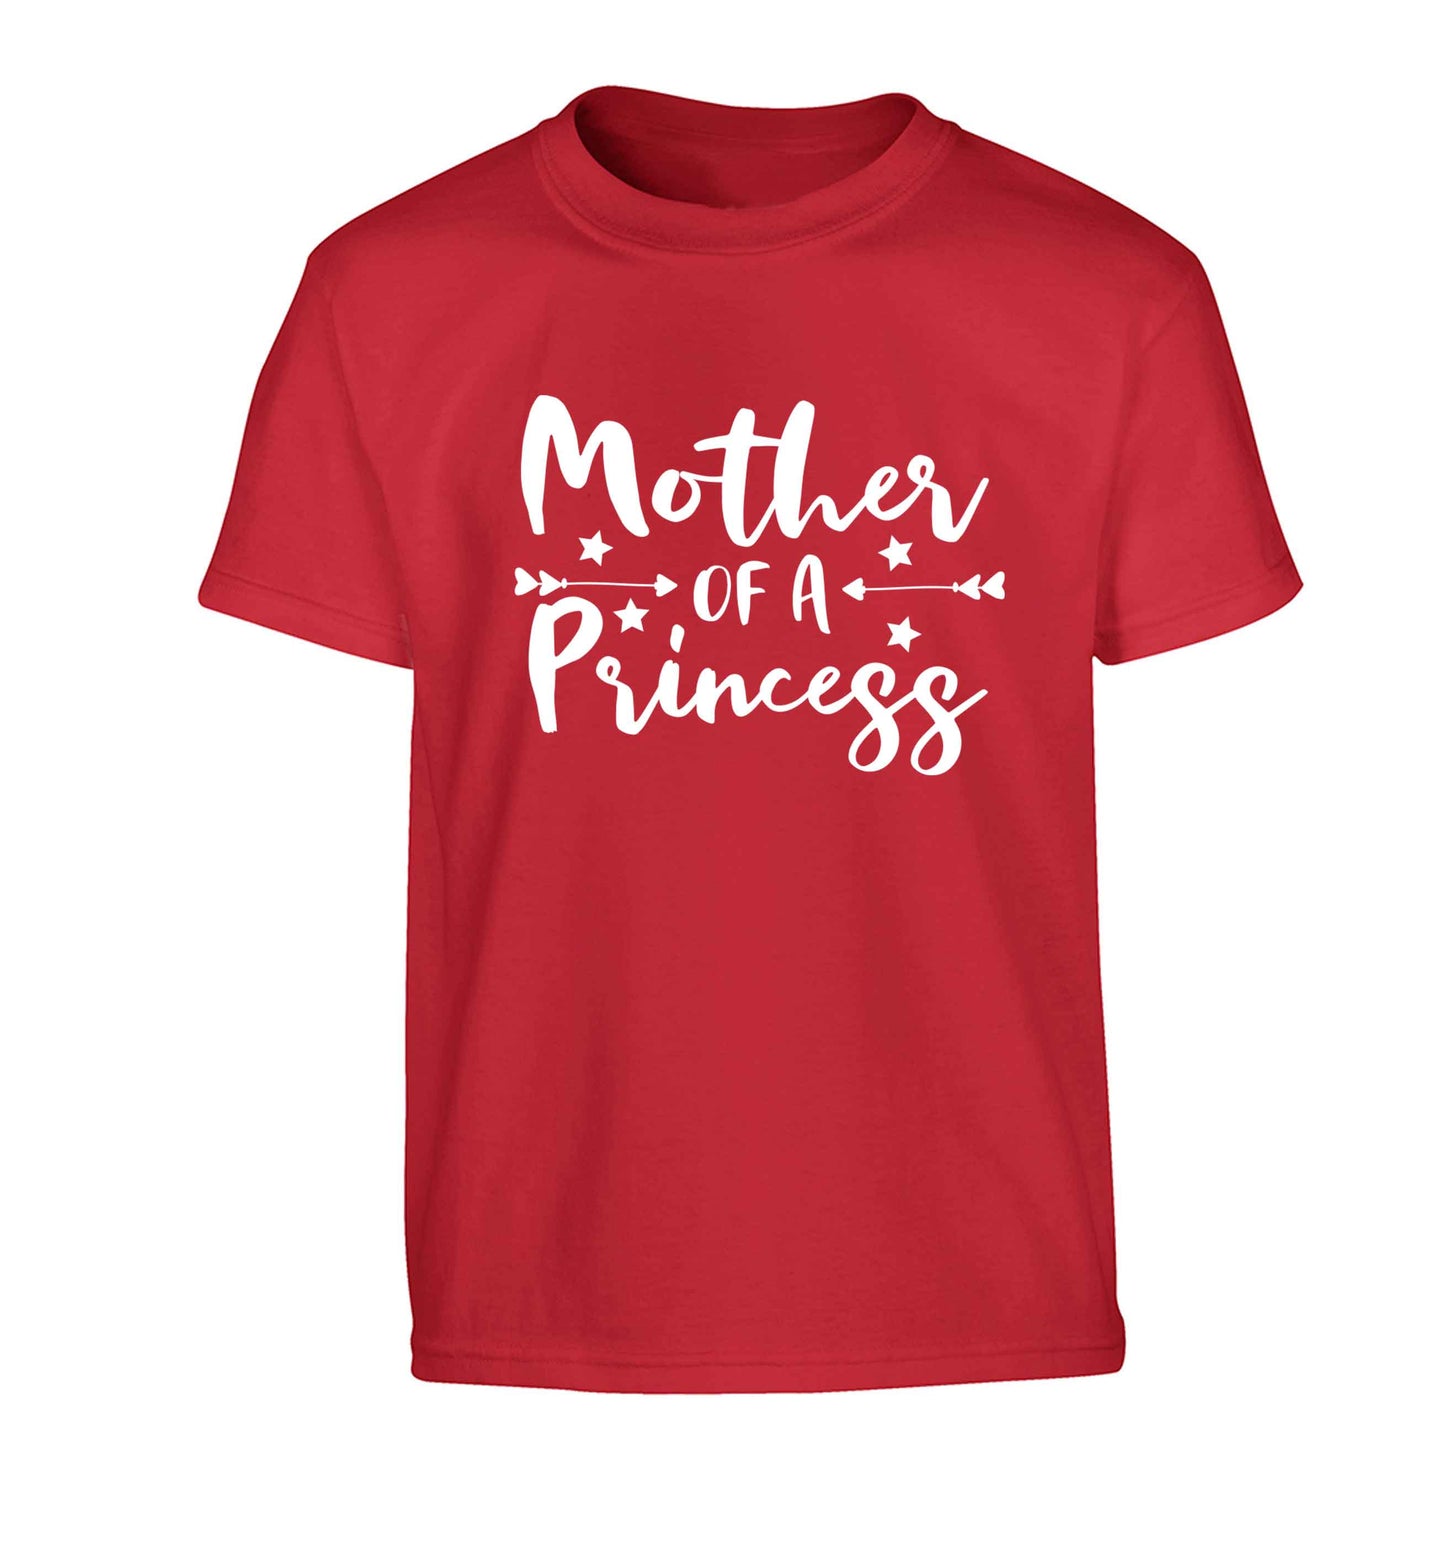 Mother of a princess Children's red Tshirt 12-13 Years